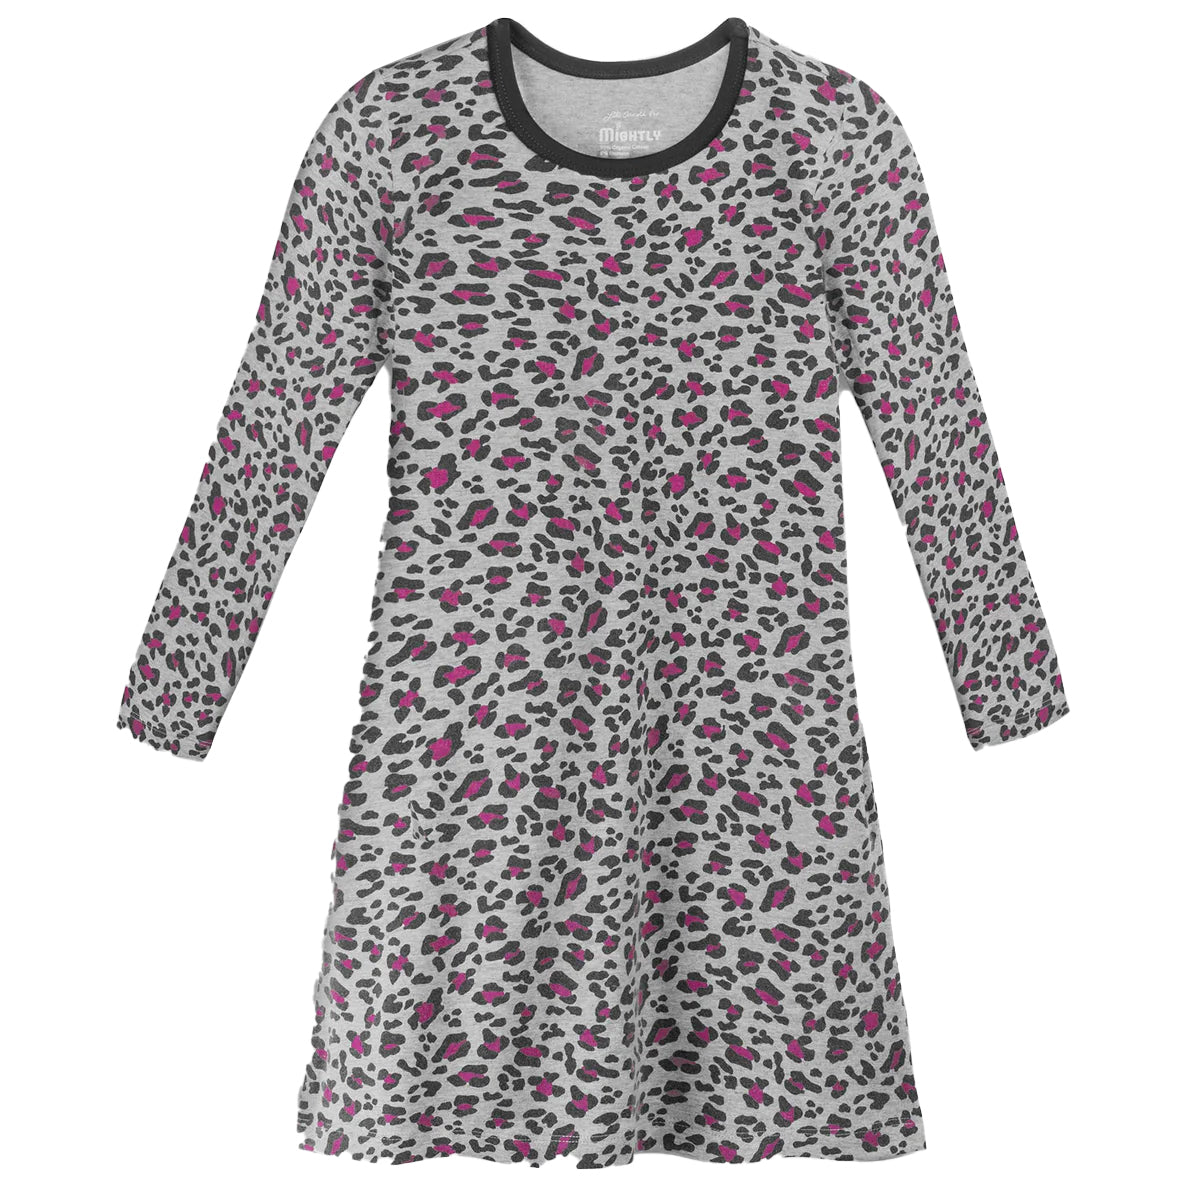 Pre-owned Pink Leopard Dress size: 2-5T